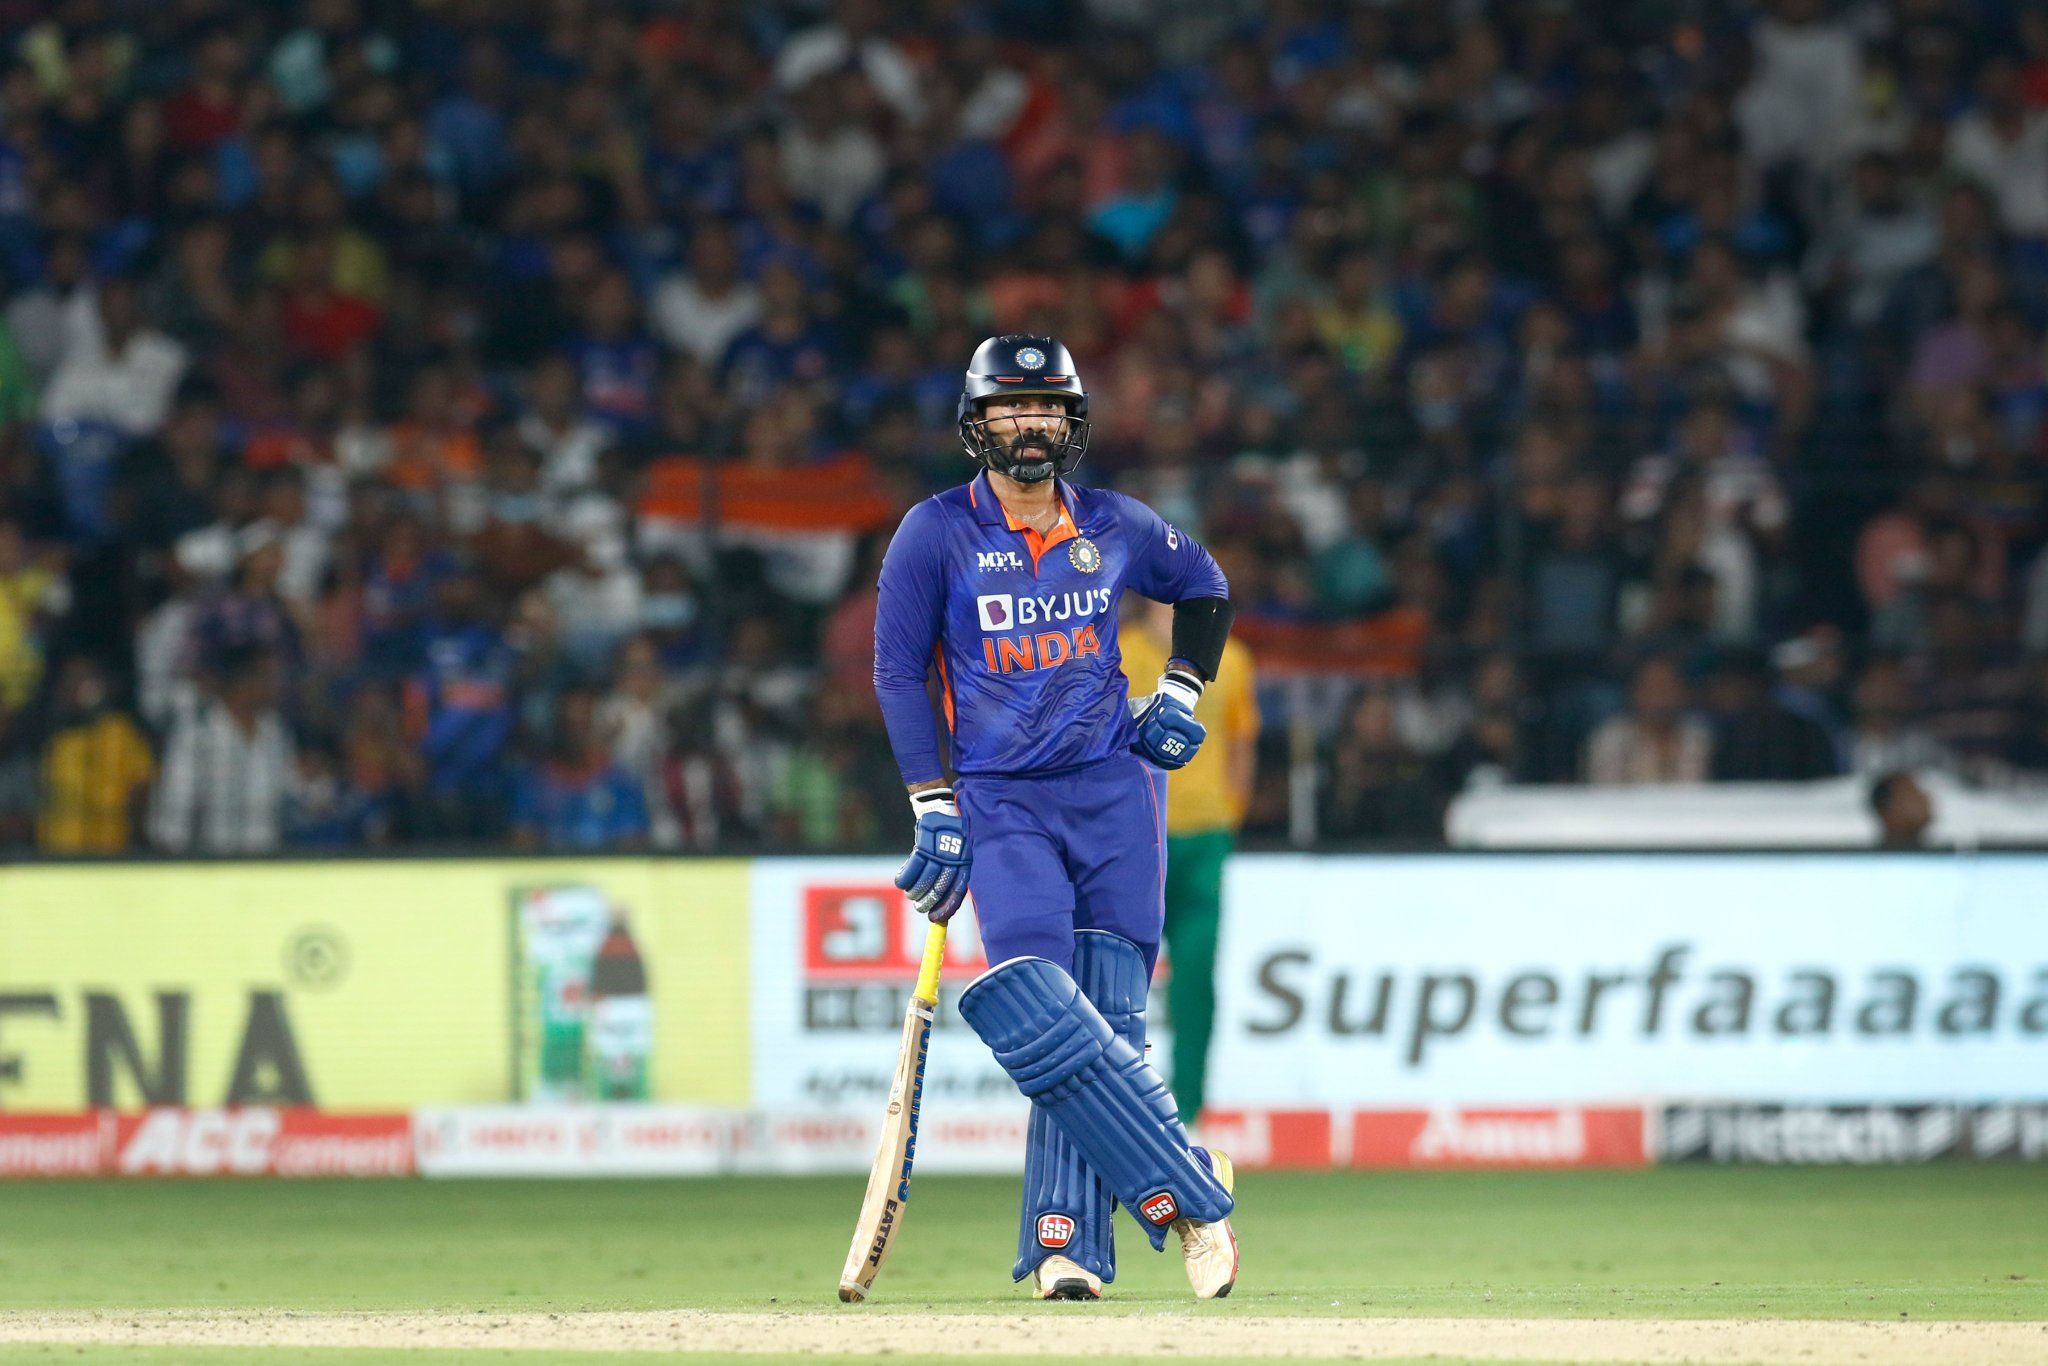 Asia Cup 2022: Pant misses out vs Pakistan, Karthik starts for India